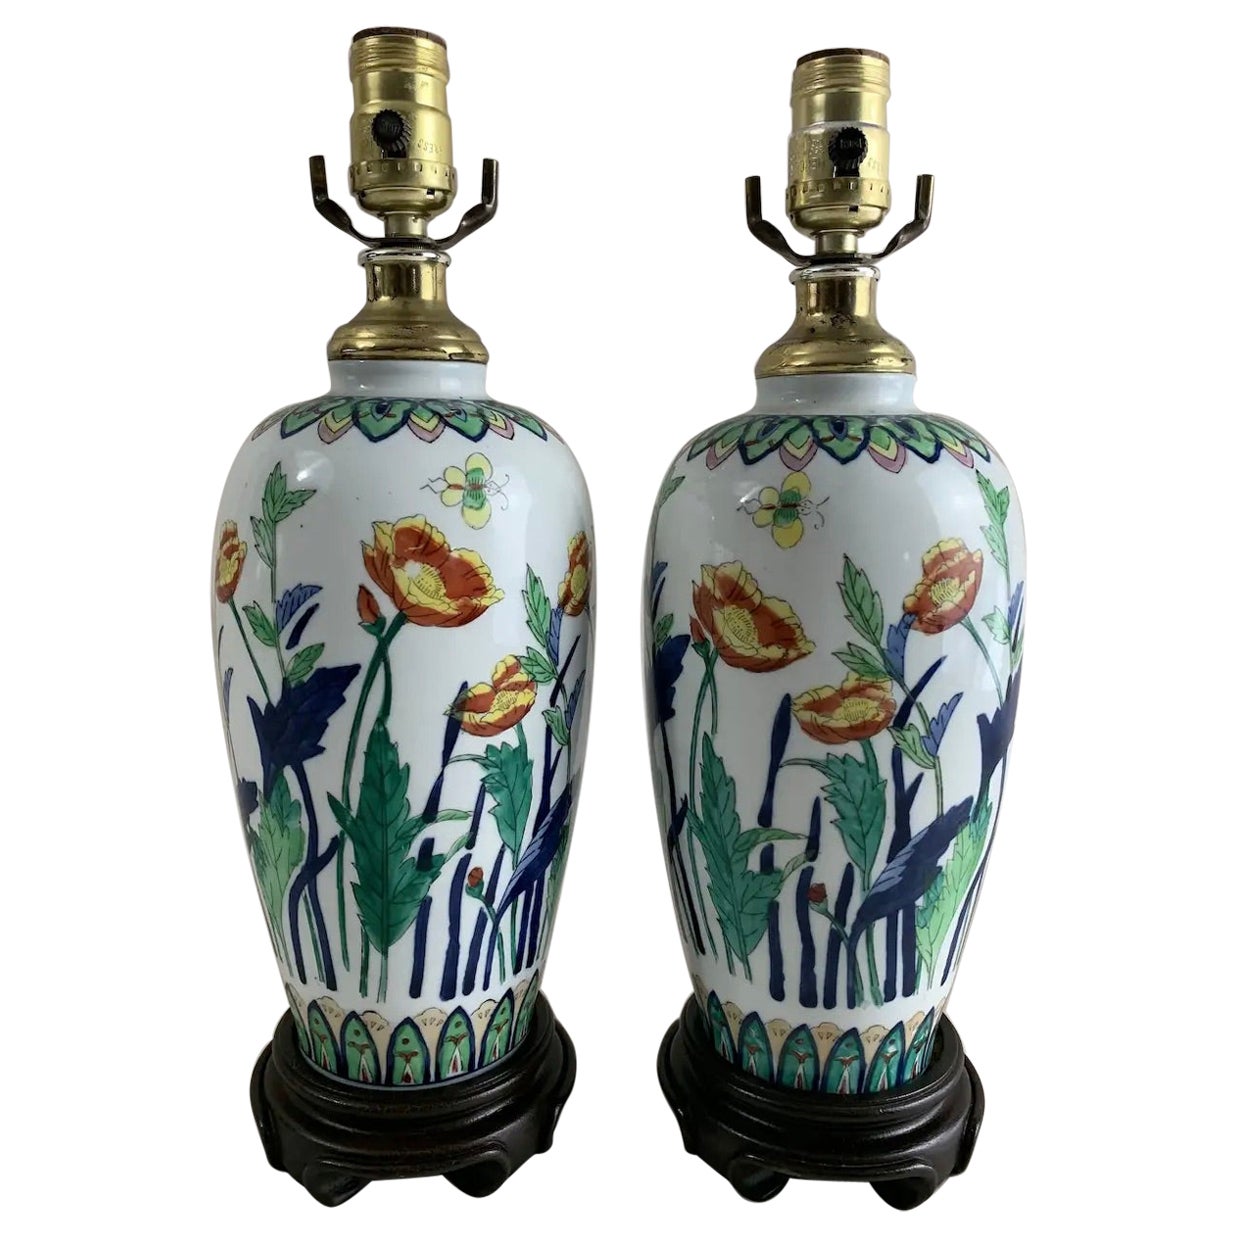 Butterflies & Poppies Hand Painted Thai Porcelain Table Lamps - 2 pc